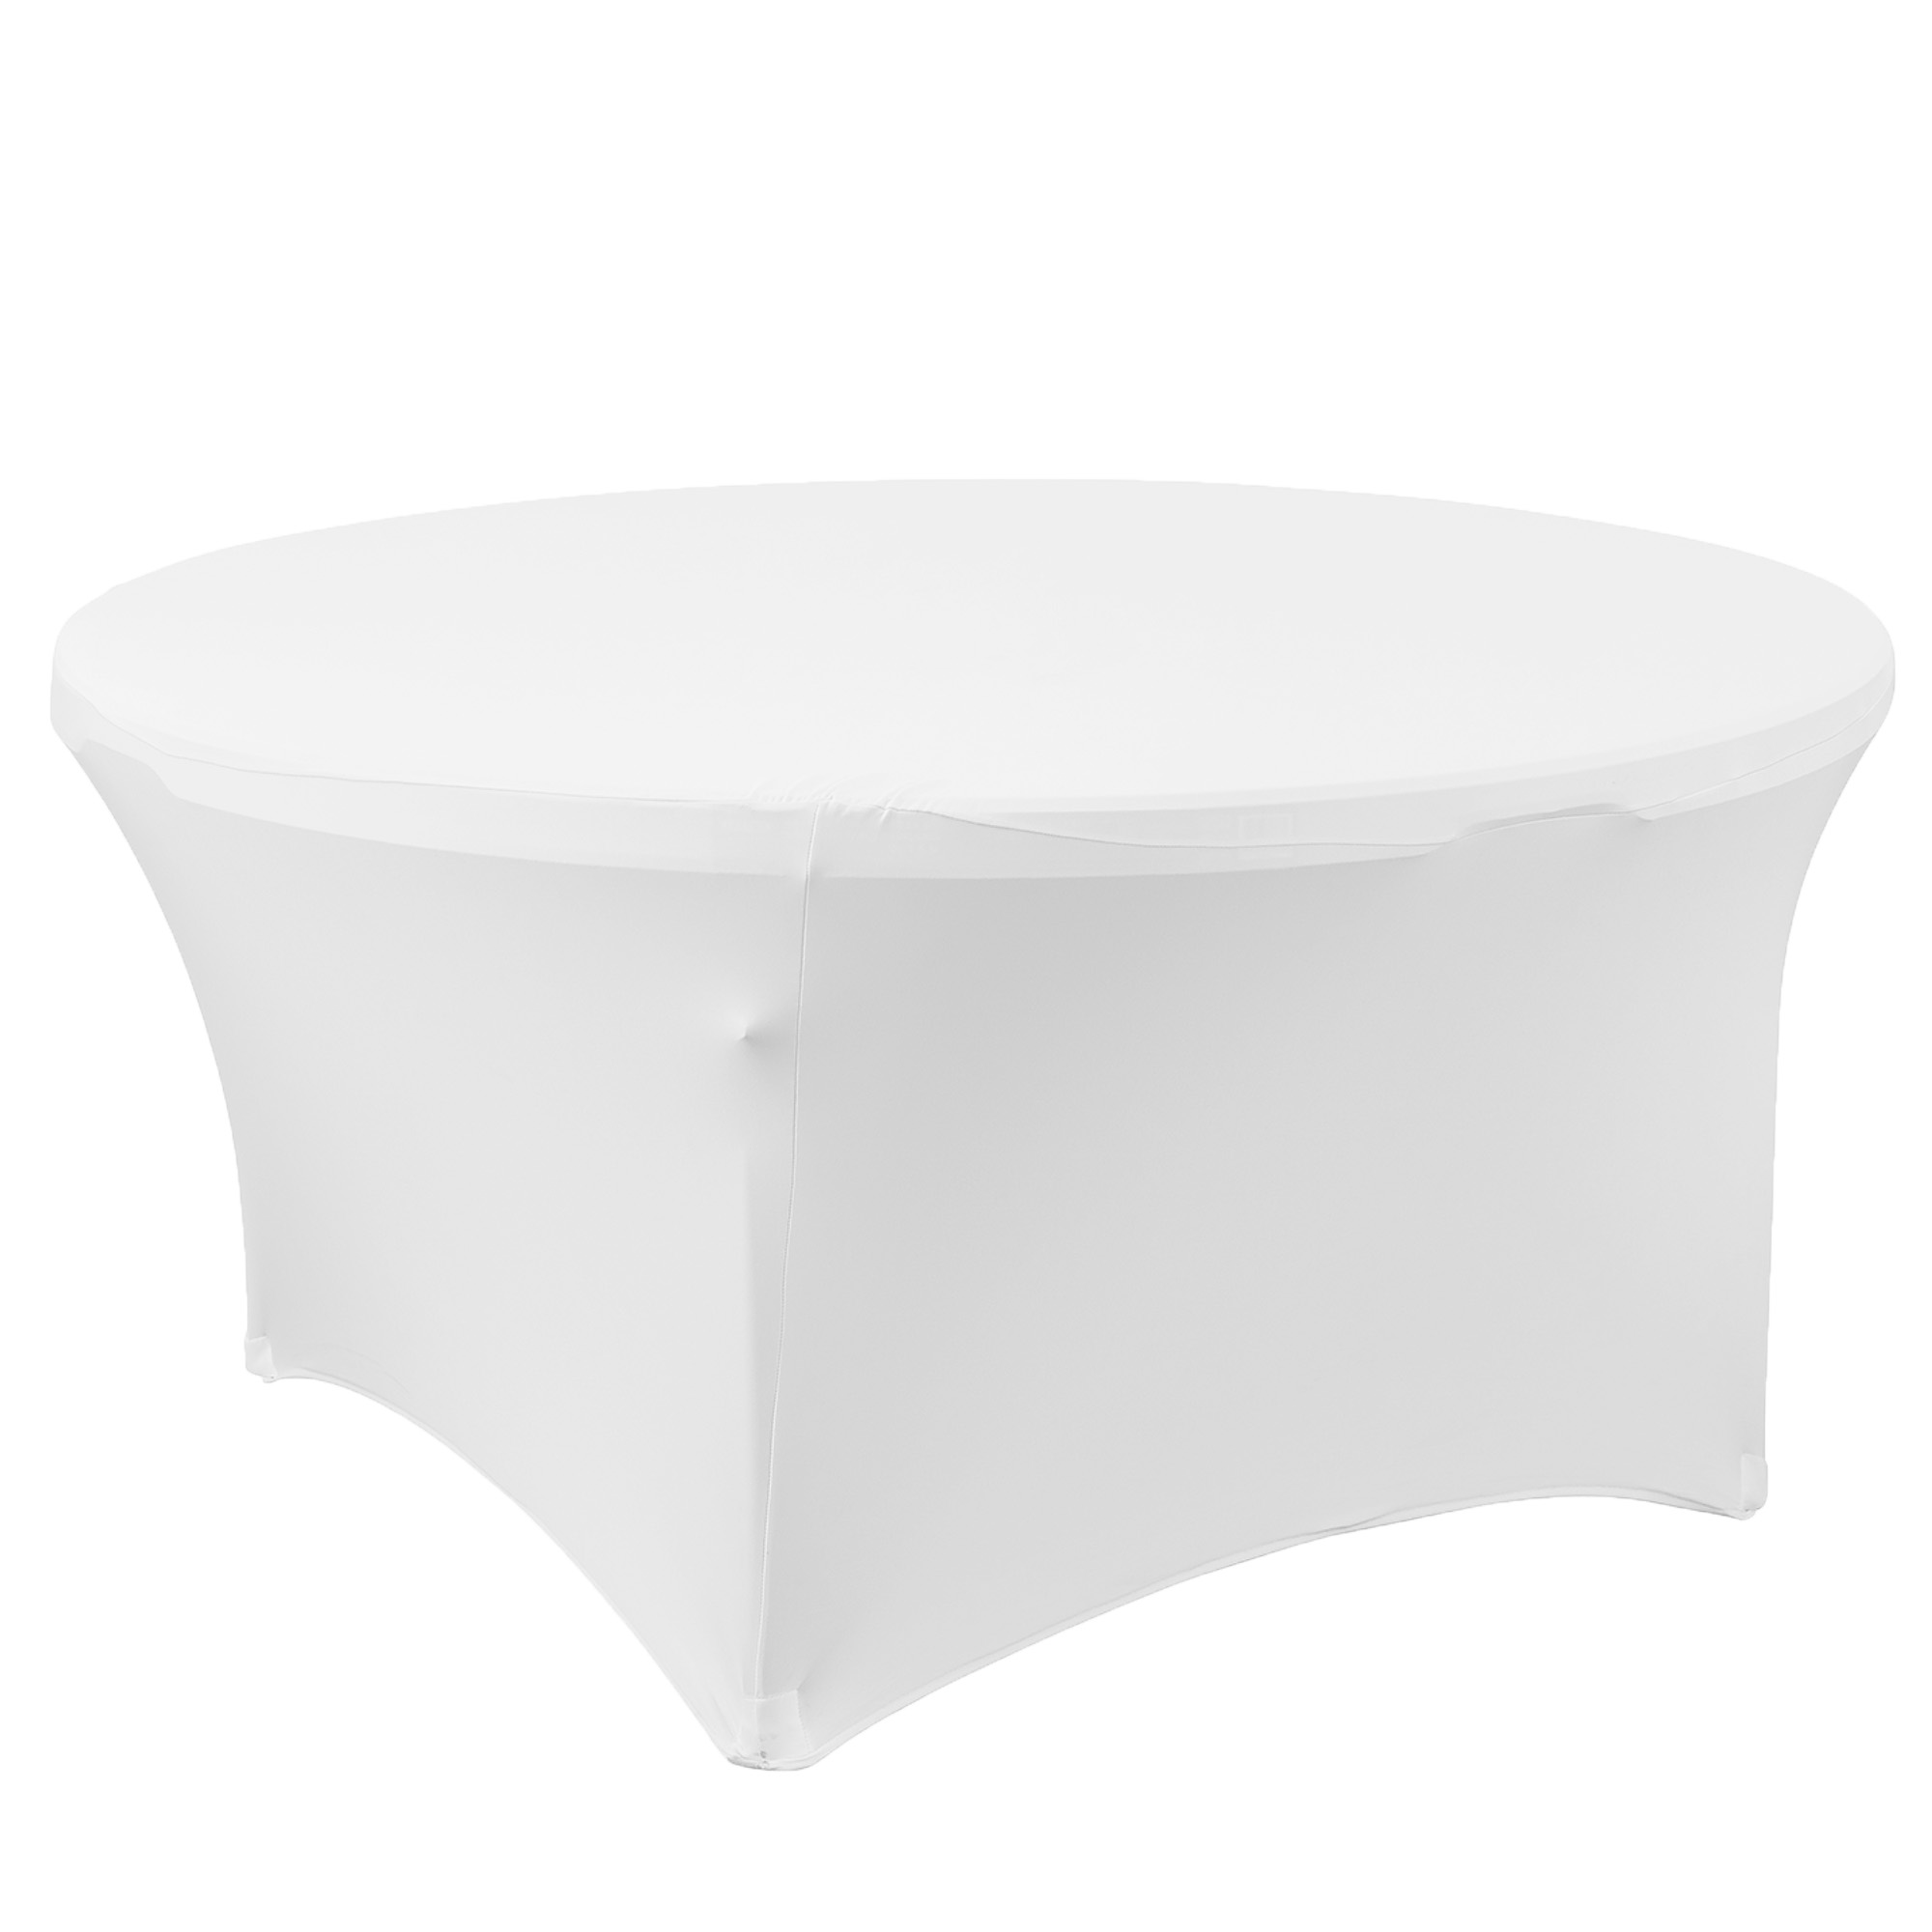 Spandex Round Table Cover 72" - White